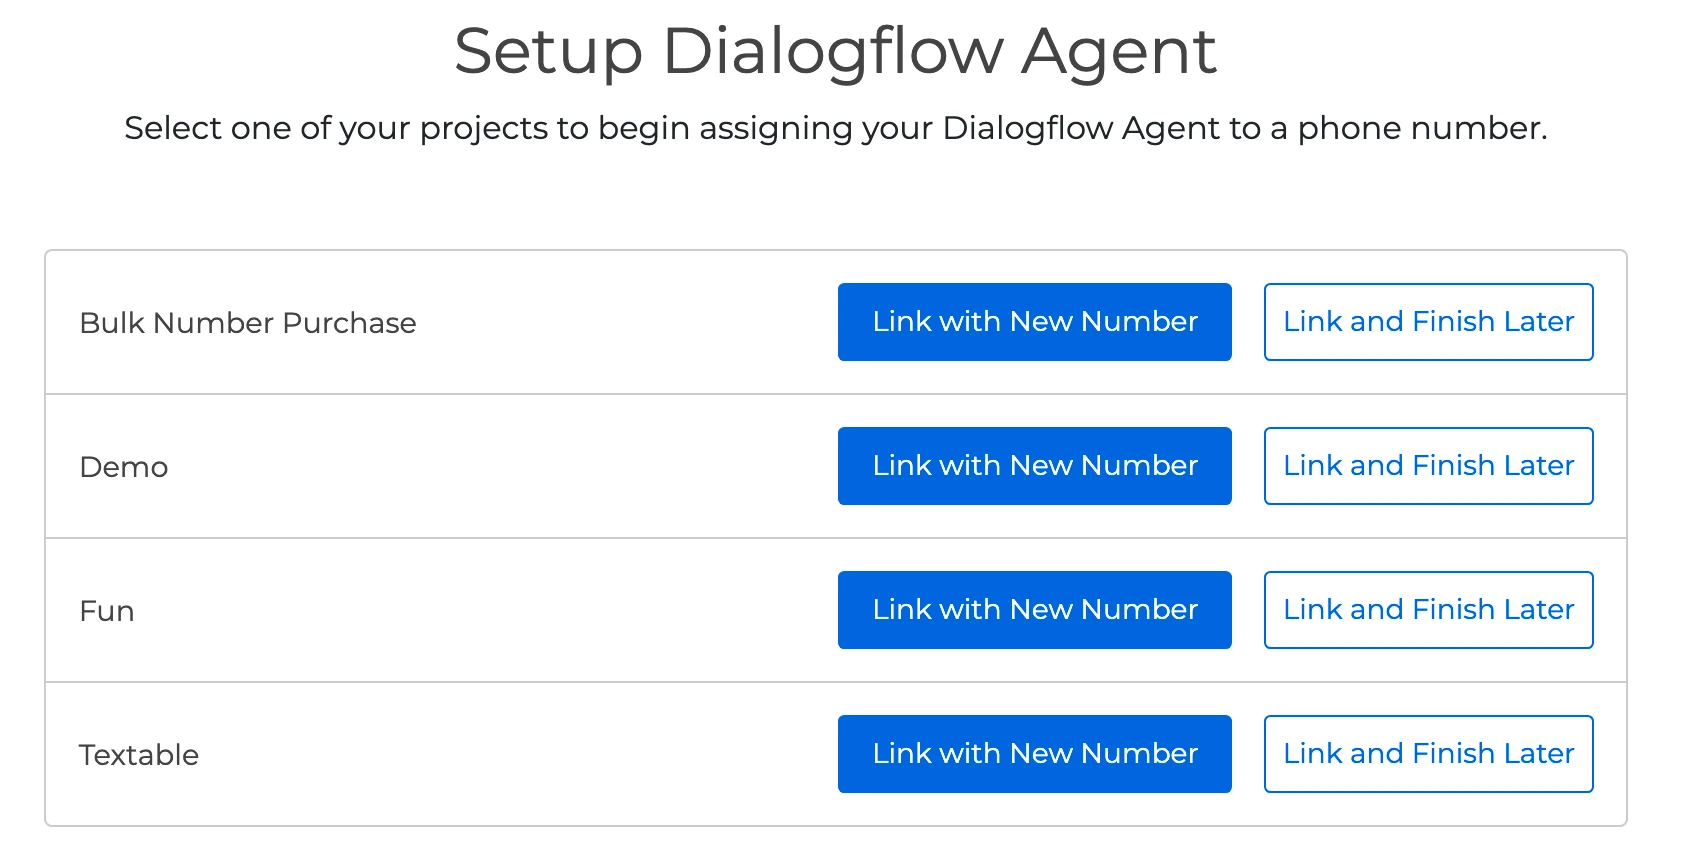 A screenshot of the Setup Dialogflow Agent page, with options to link new numbers or link and finish later.